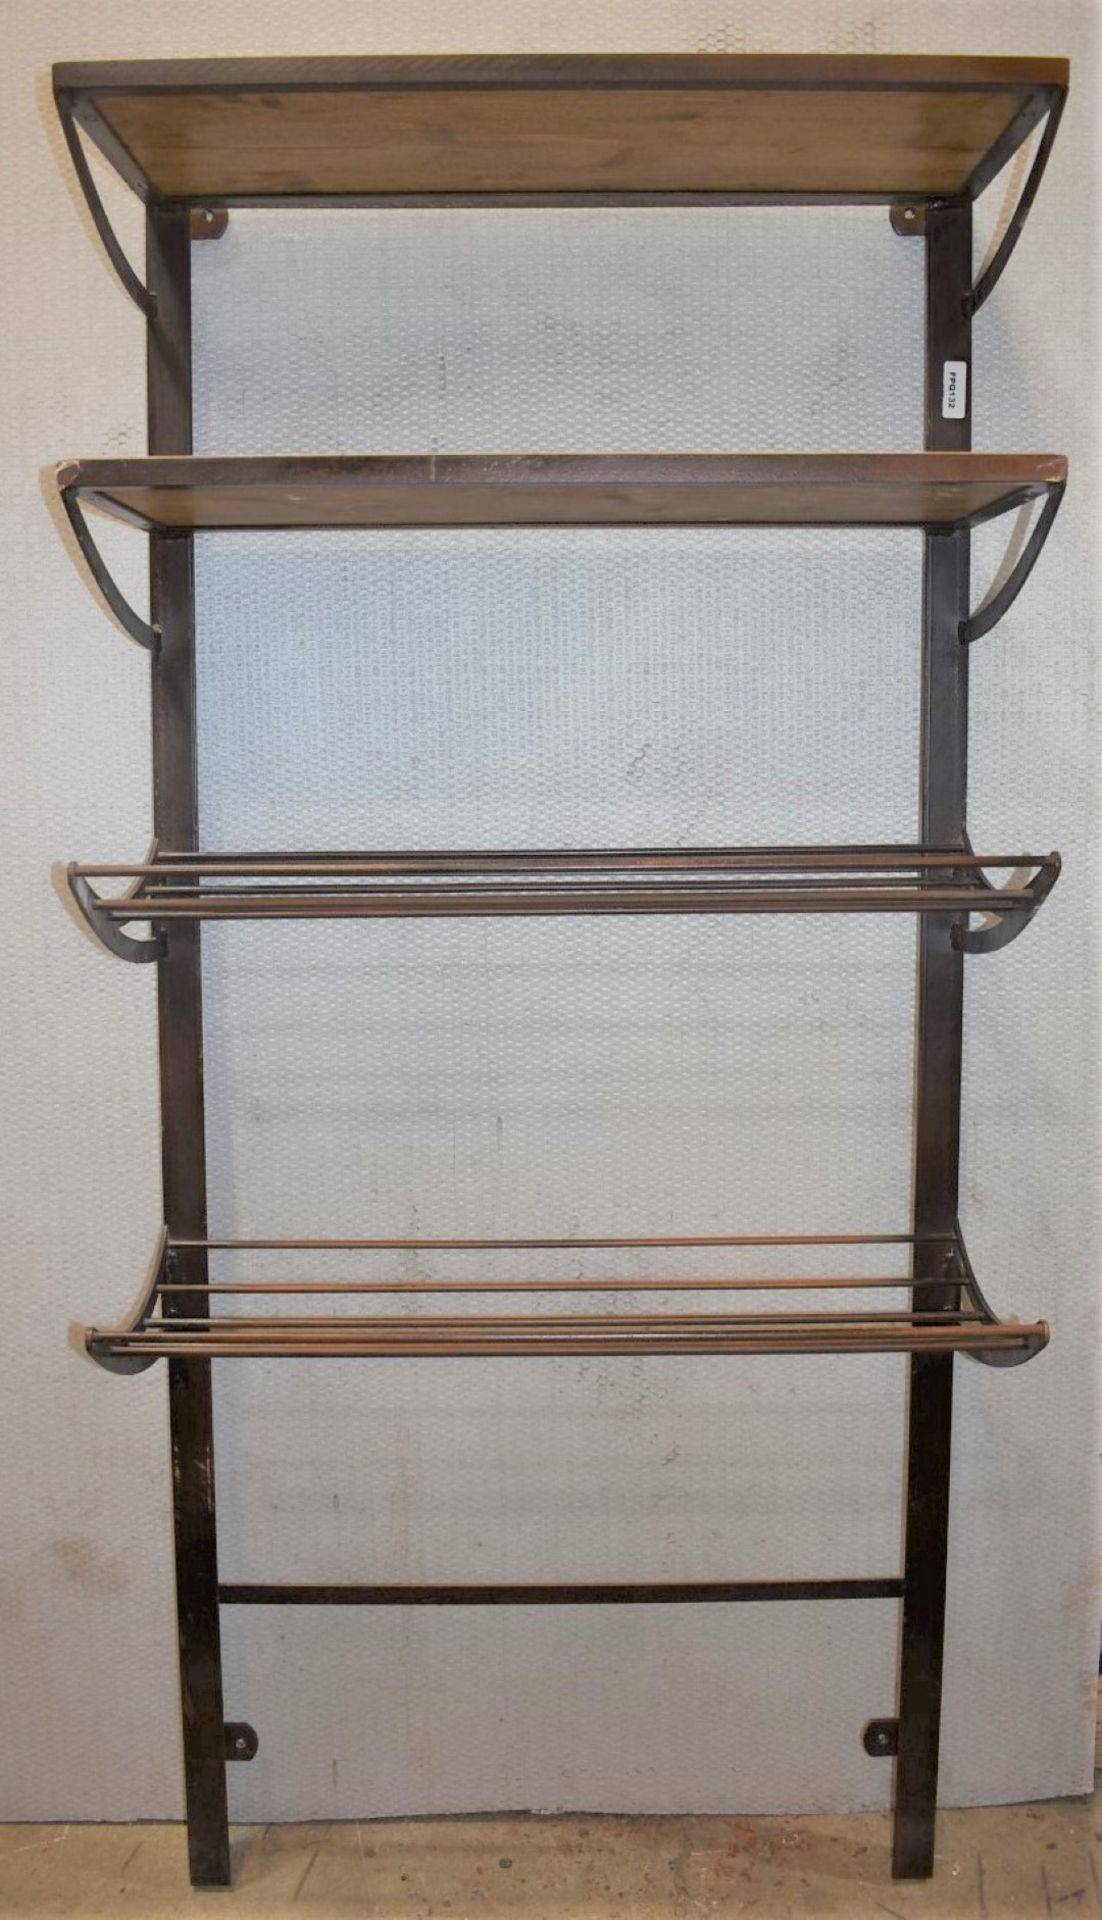 5 x Rustic Bakery Wall Shelf Units With a Rustic Traditional Finish - Over 14ft in Length! - Image 17 of 25